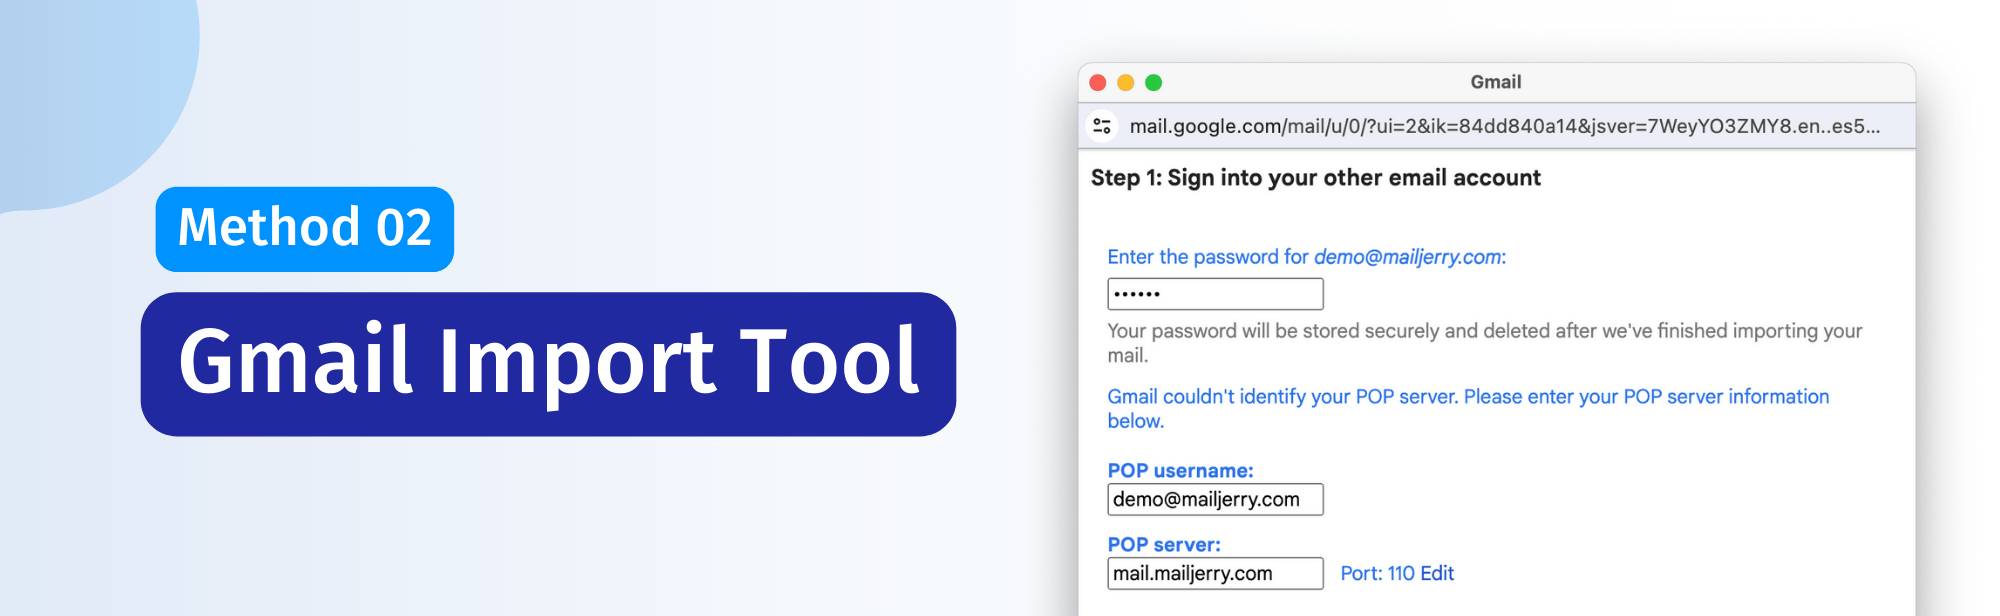 import mails: gmail import tool